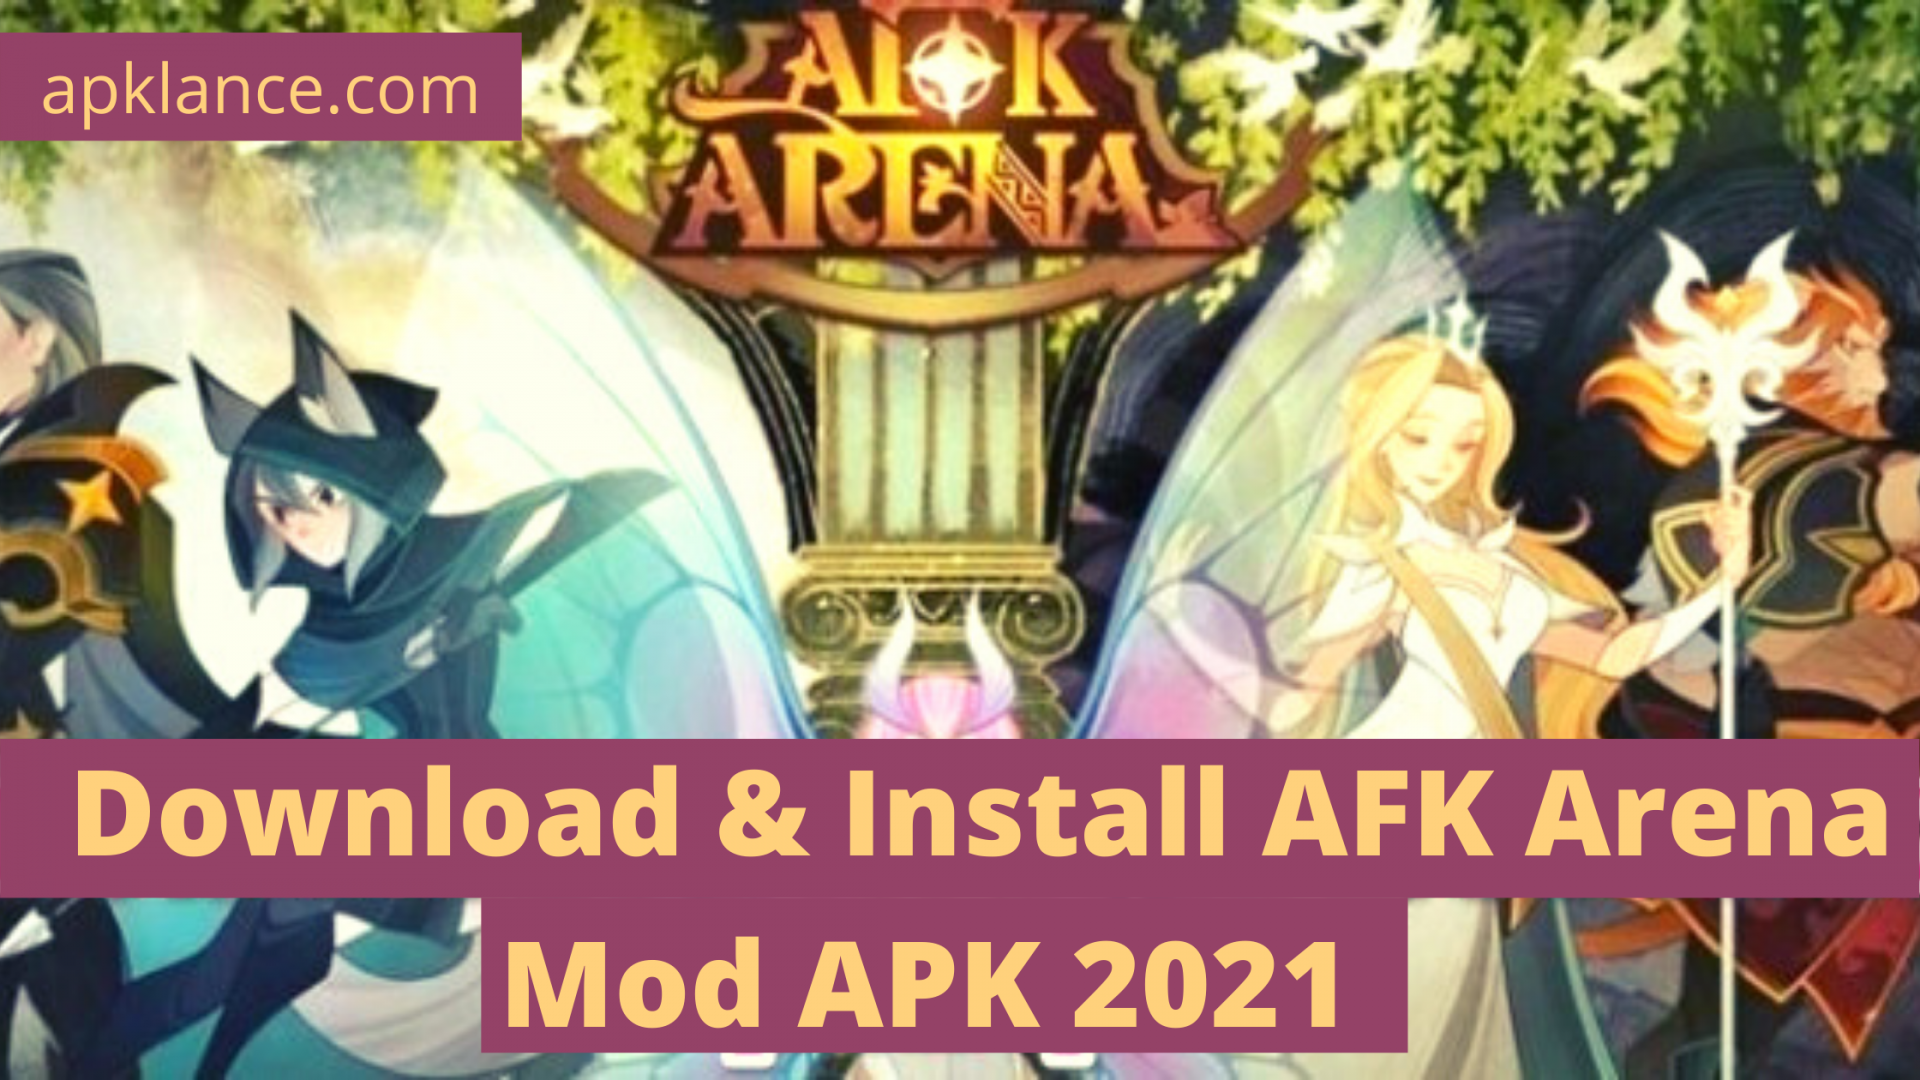 AFK Arena Mod APK 2021 Latest Updated with Unlimited Money